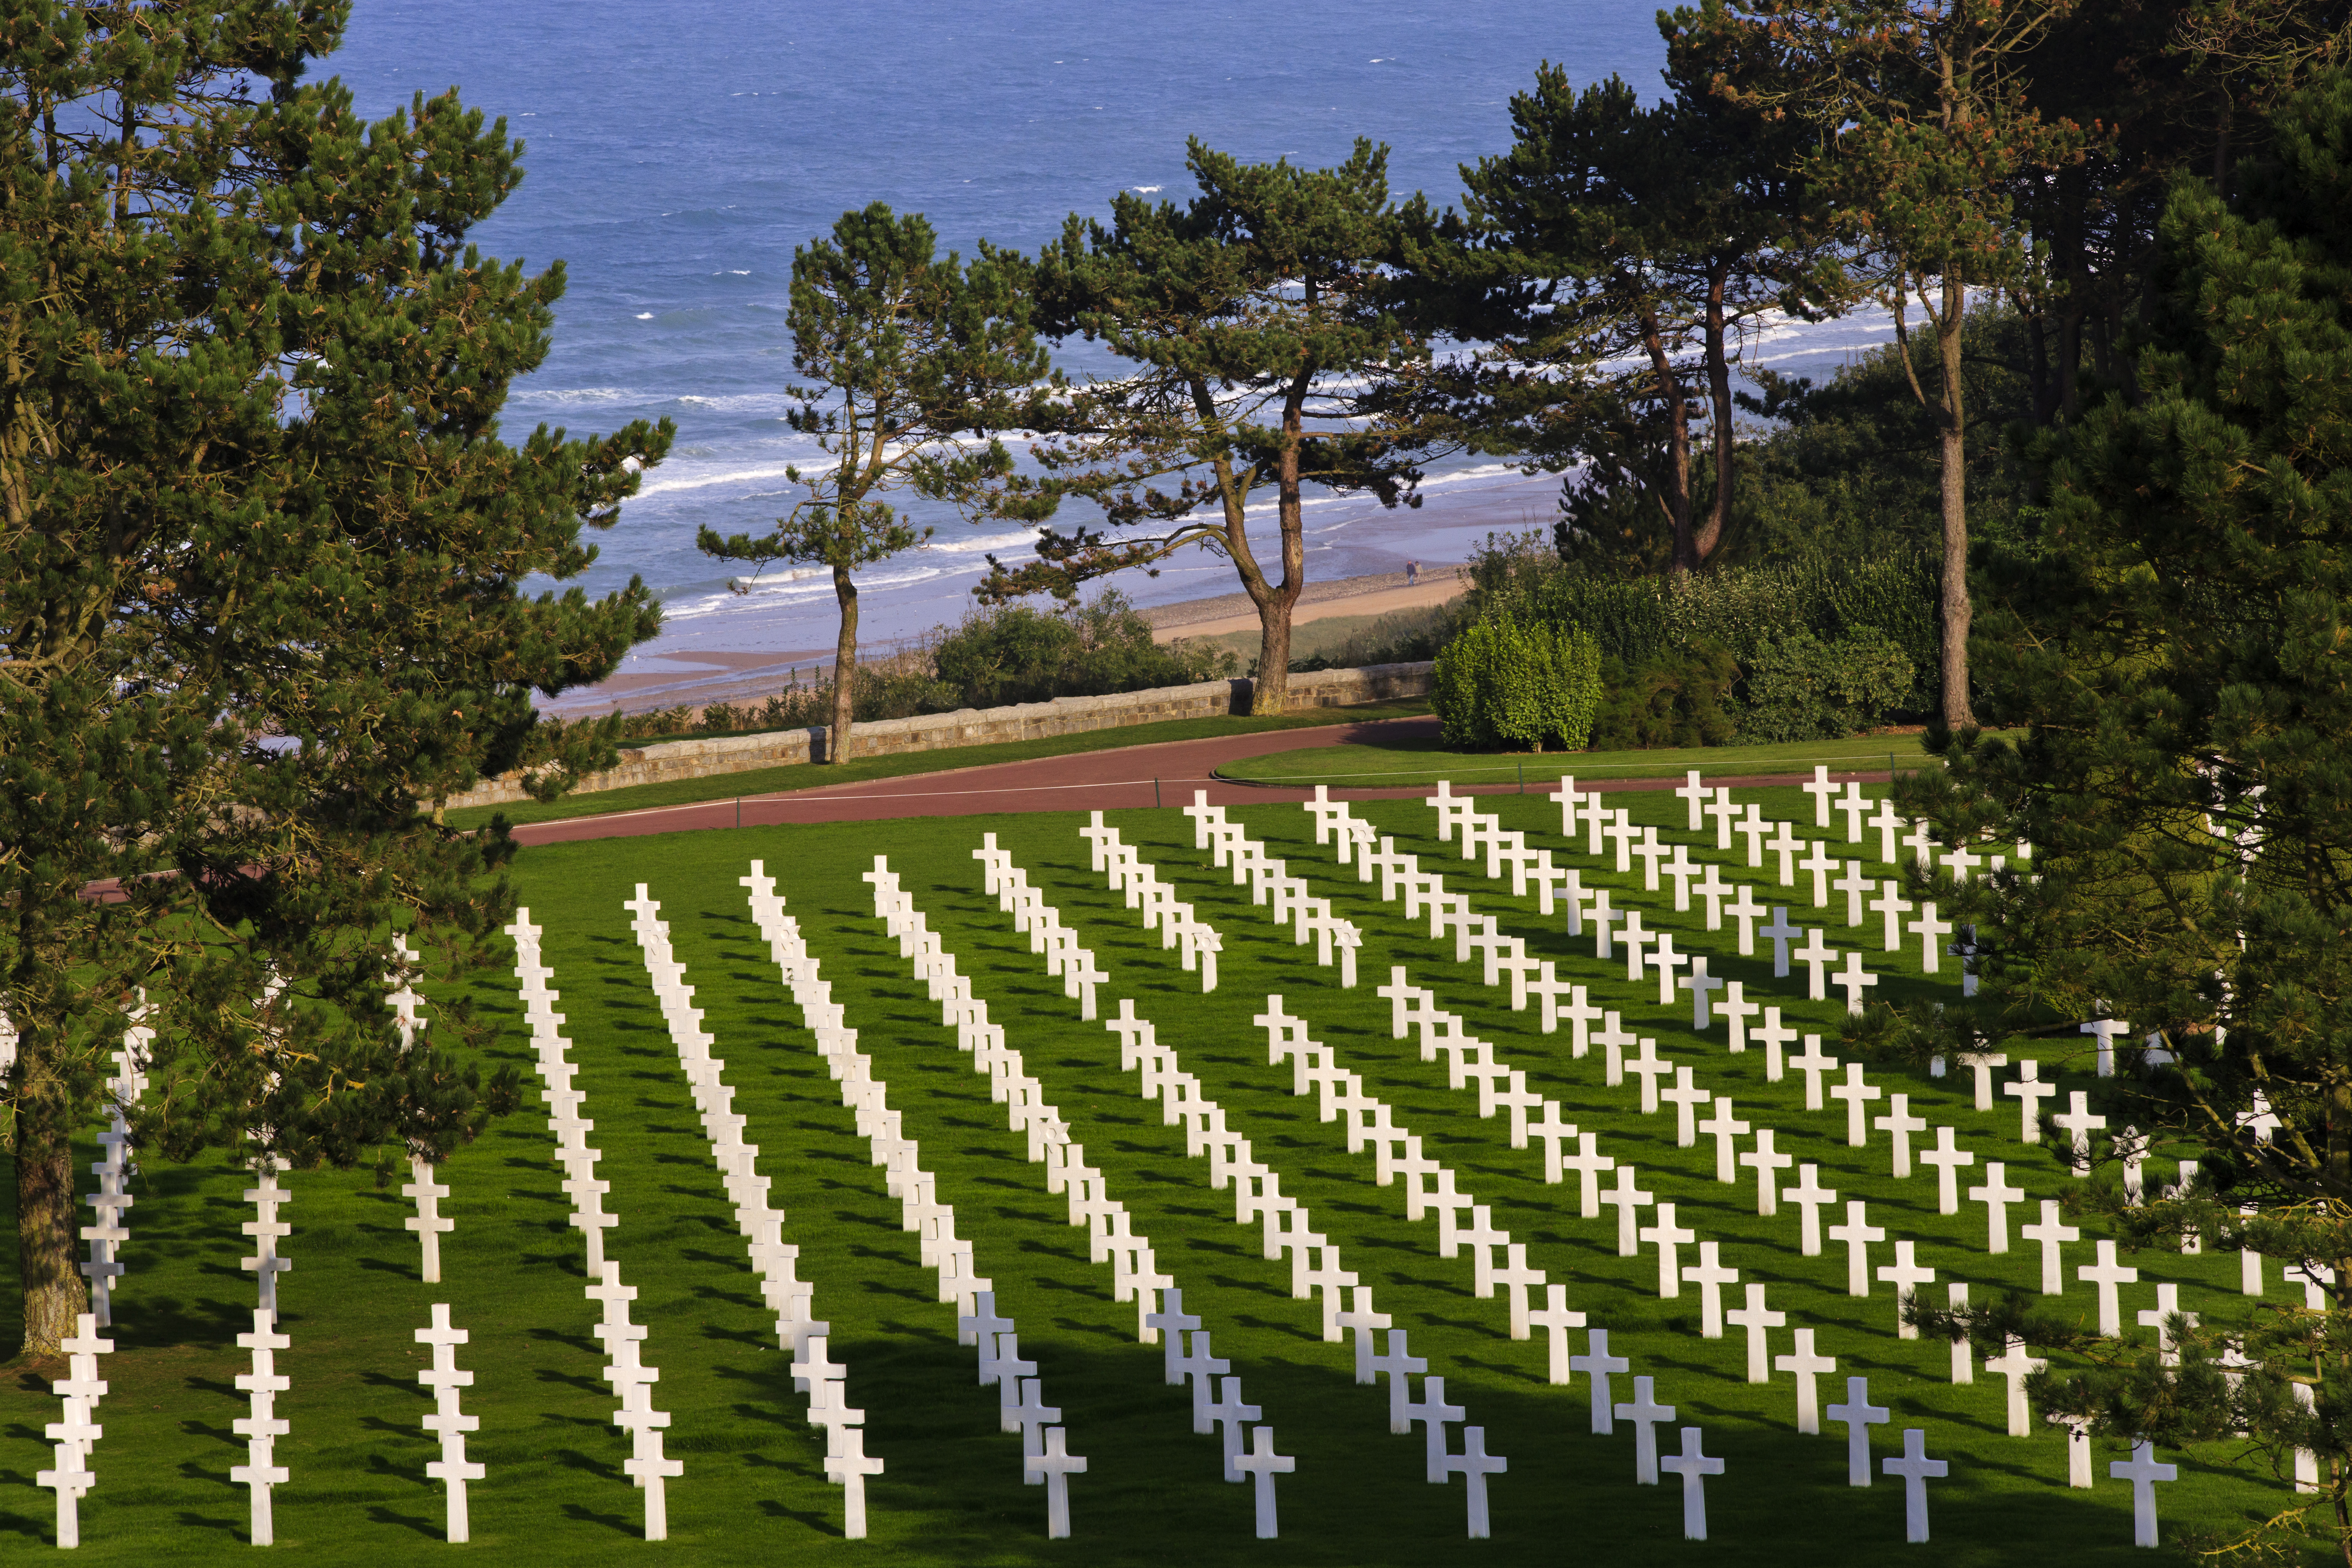 Rows of marble headstones dot the landscape with the English Channel in the background.